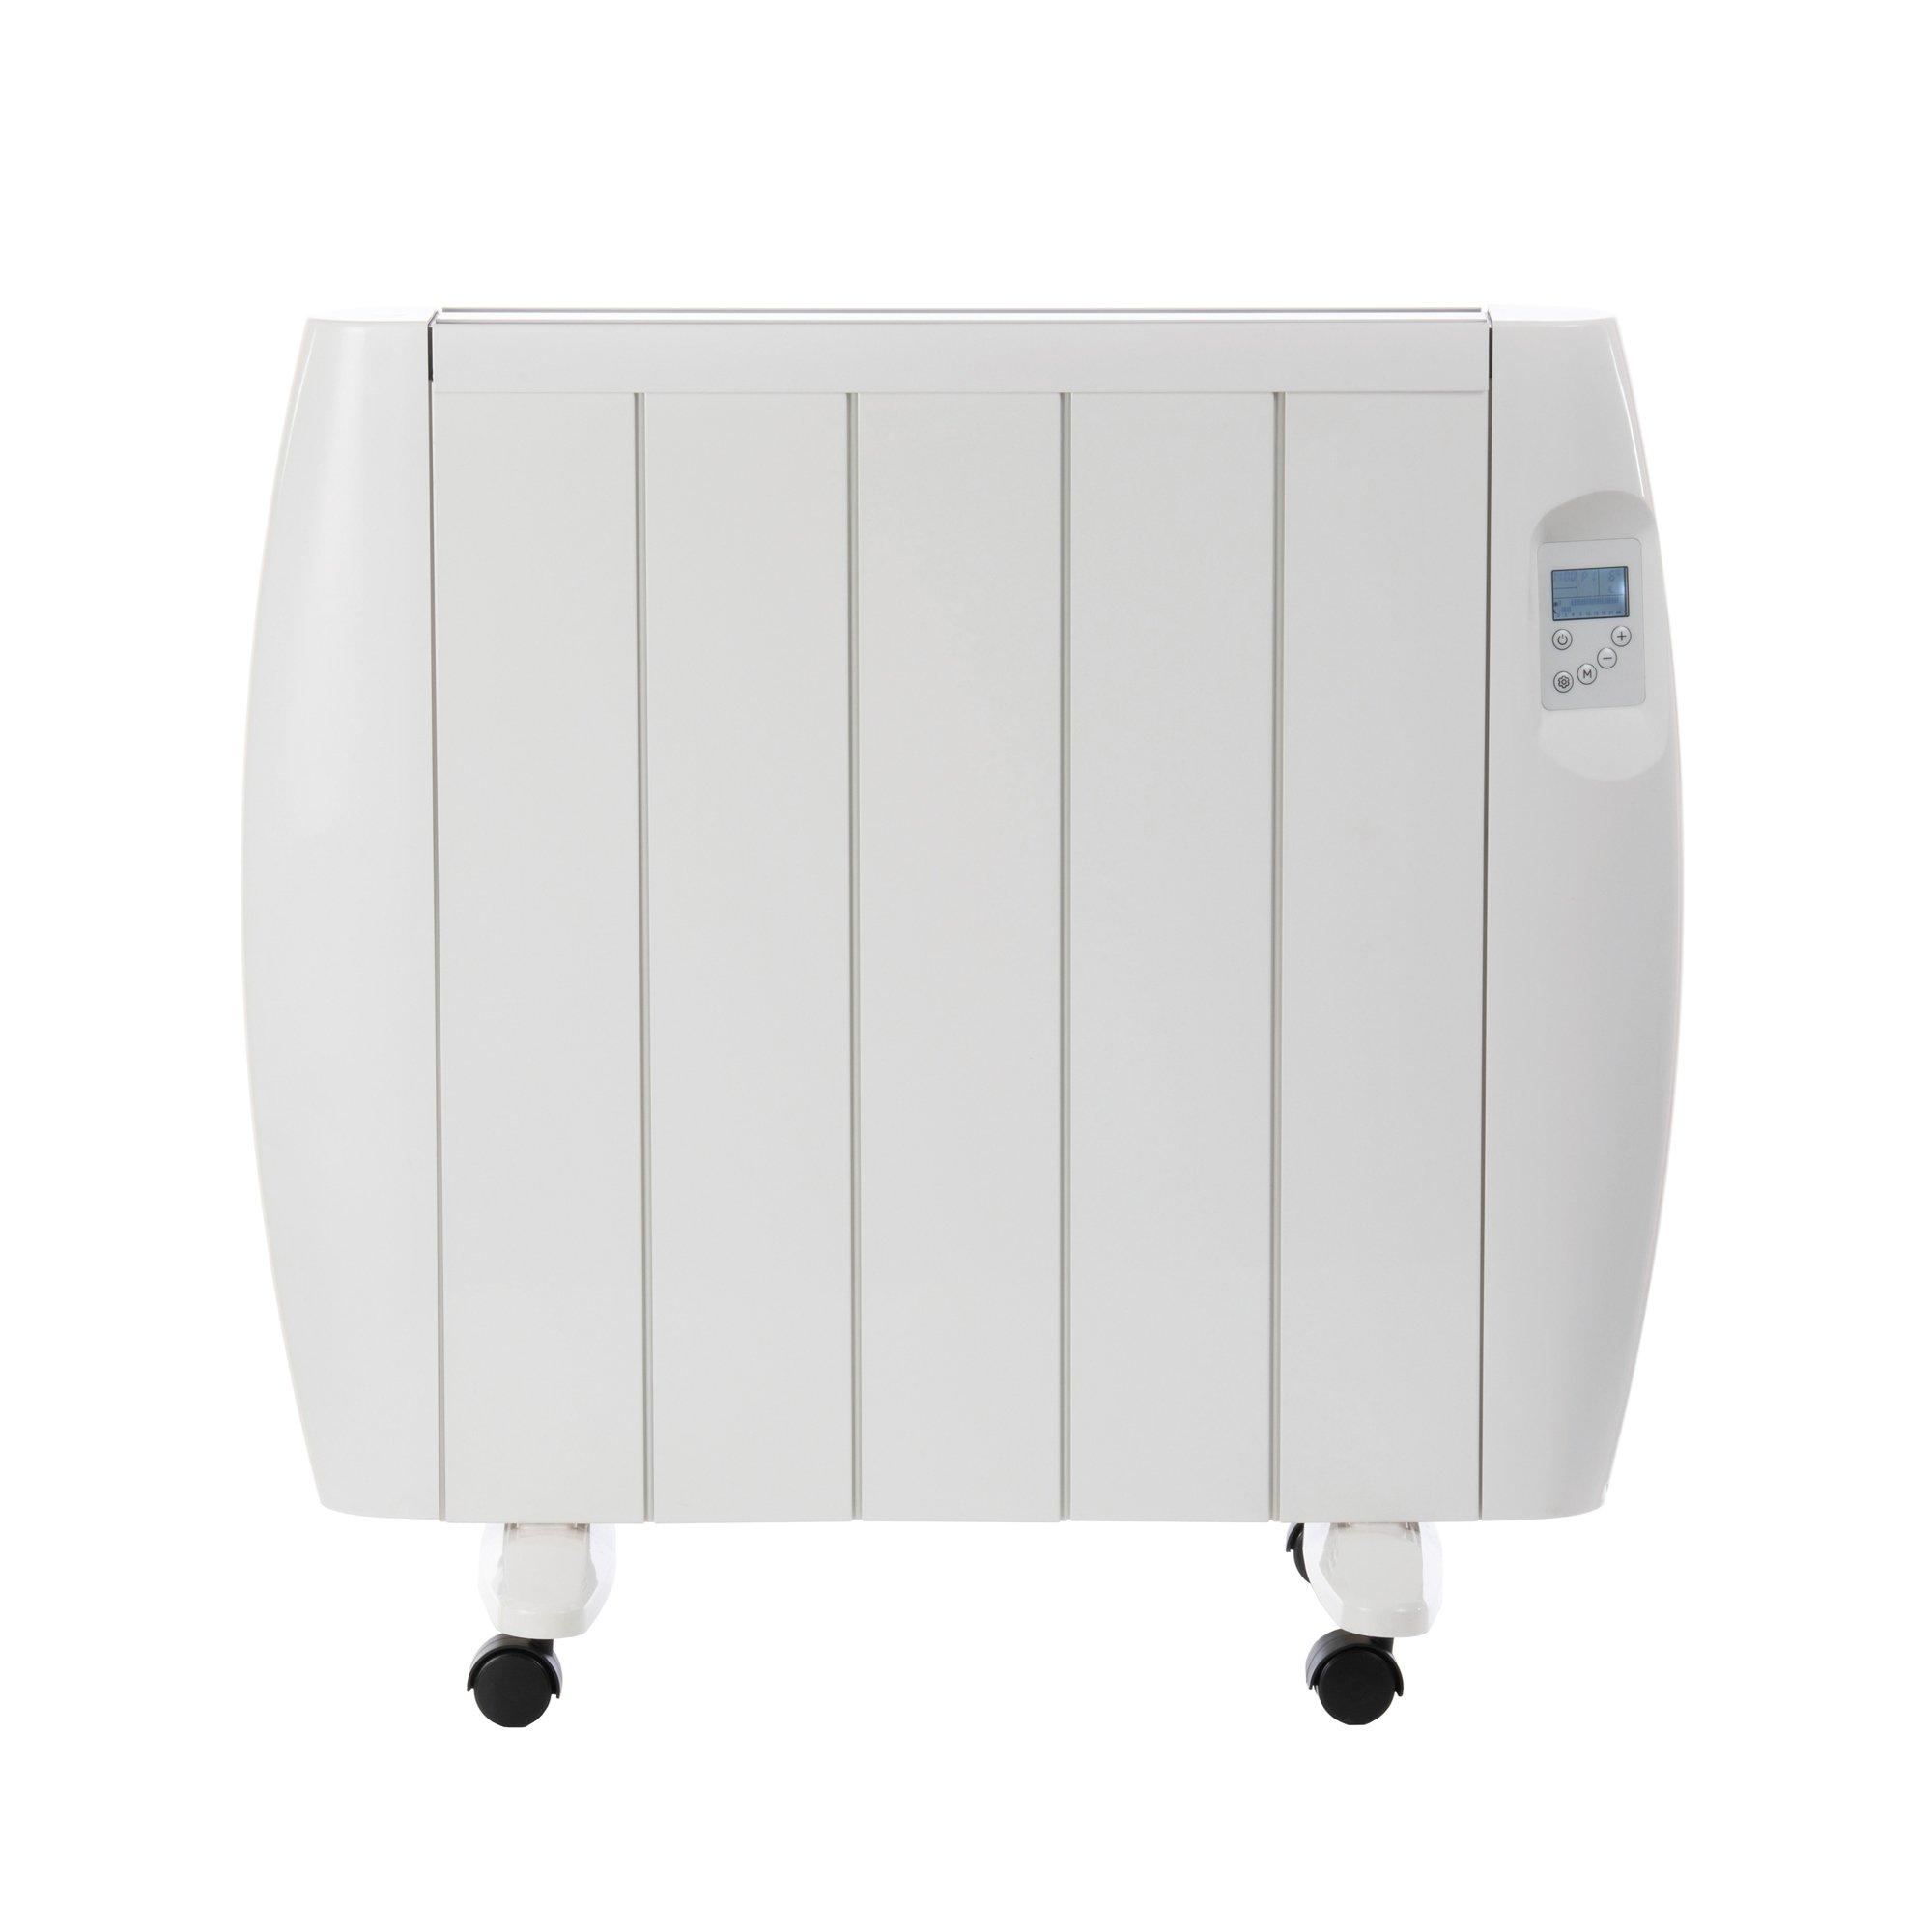 1500W Ceramic Heater 2 In 1 Portable and Wall Mounted Radiator White